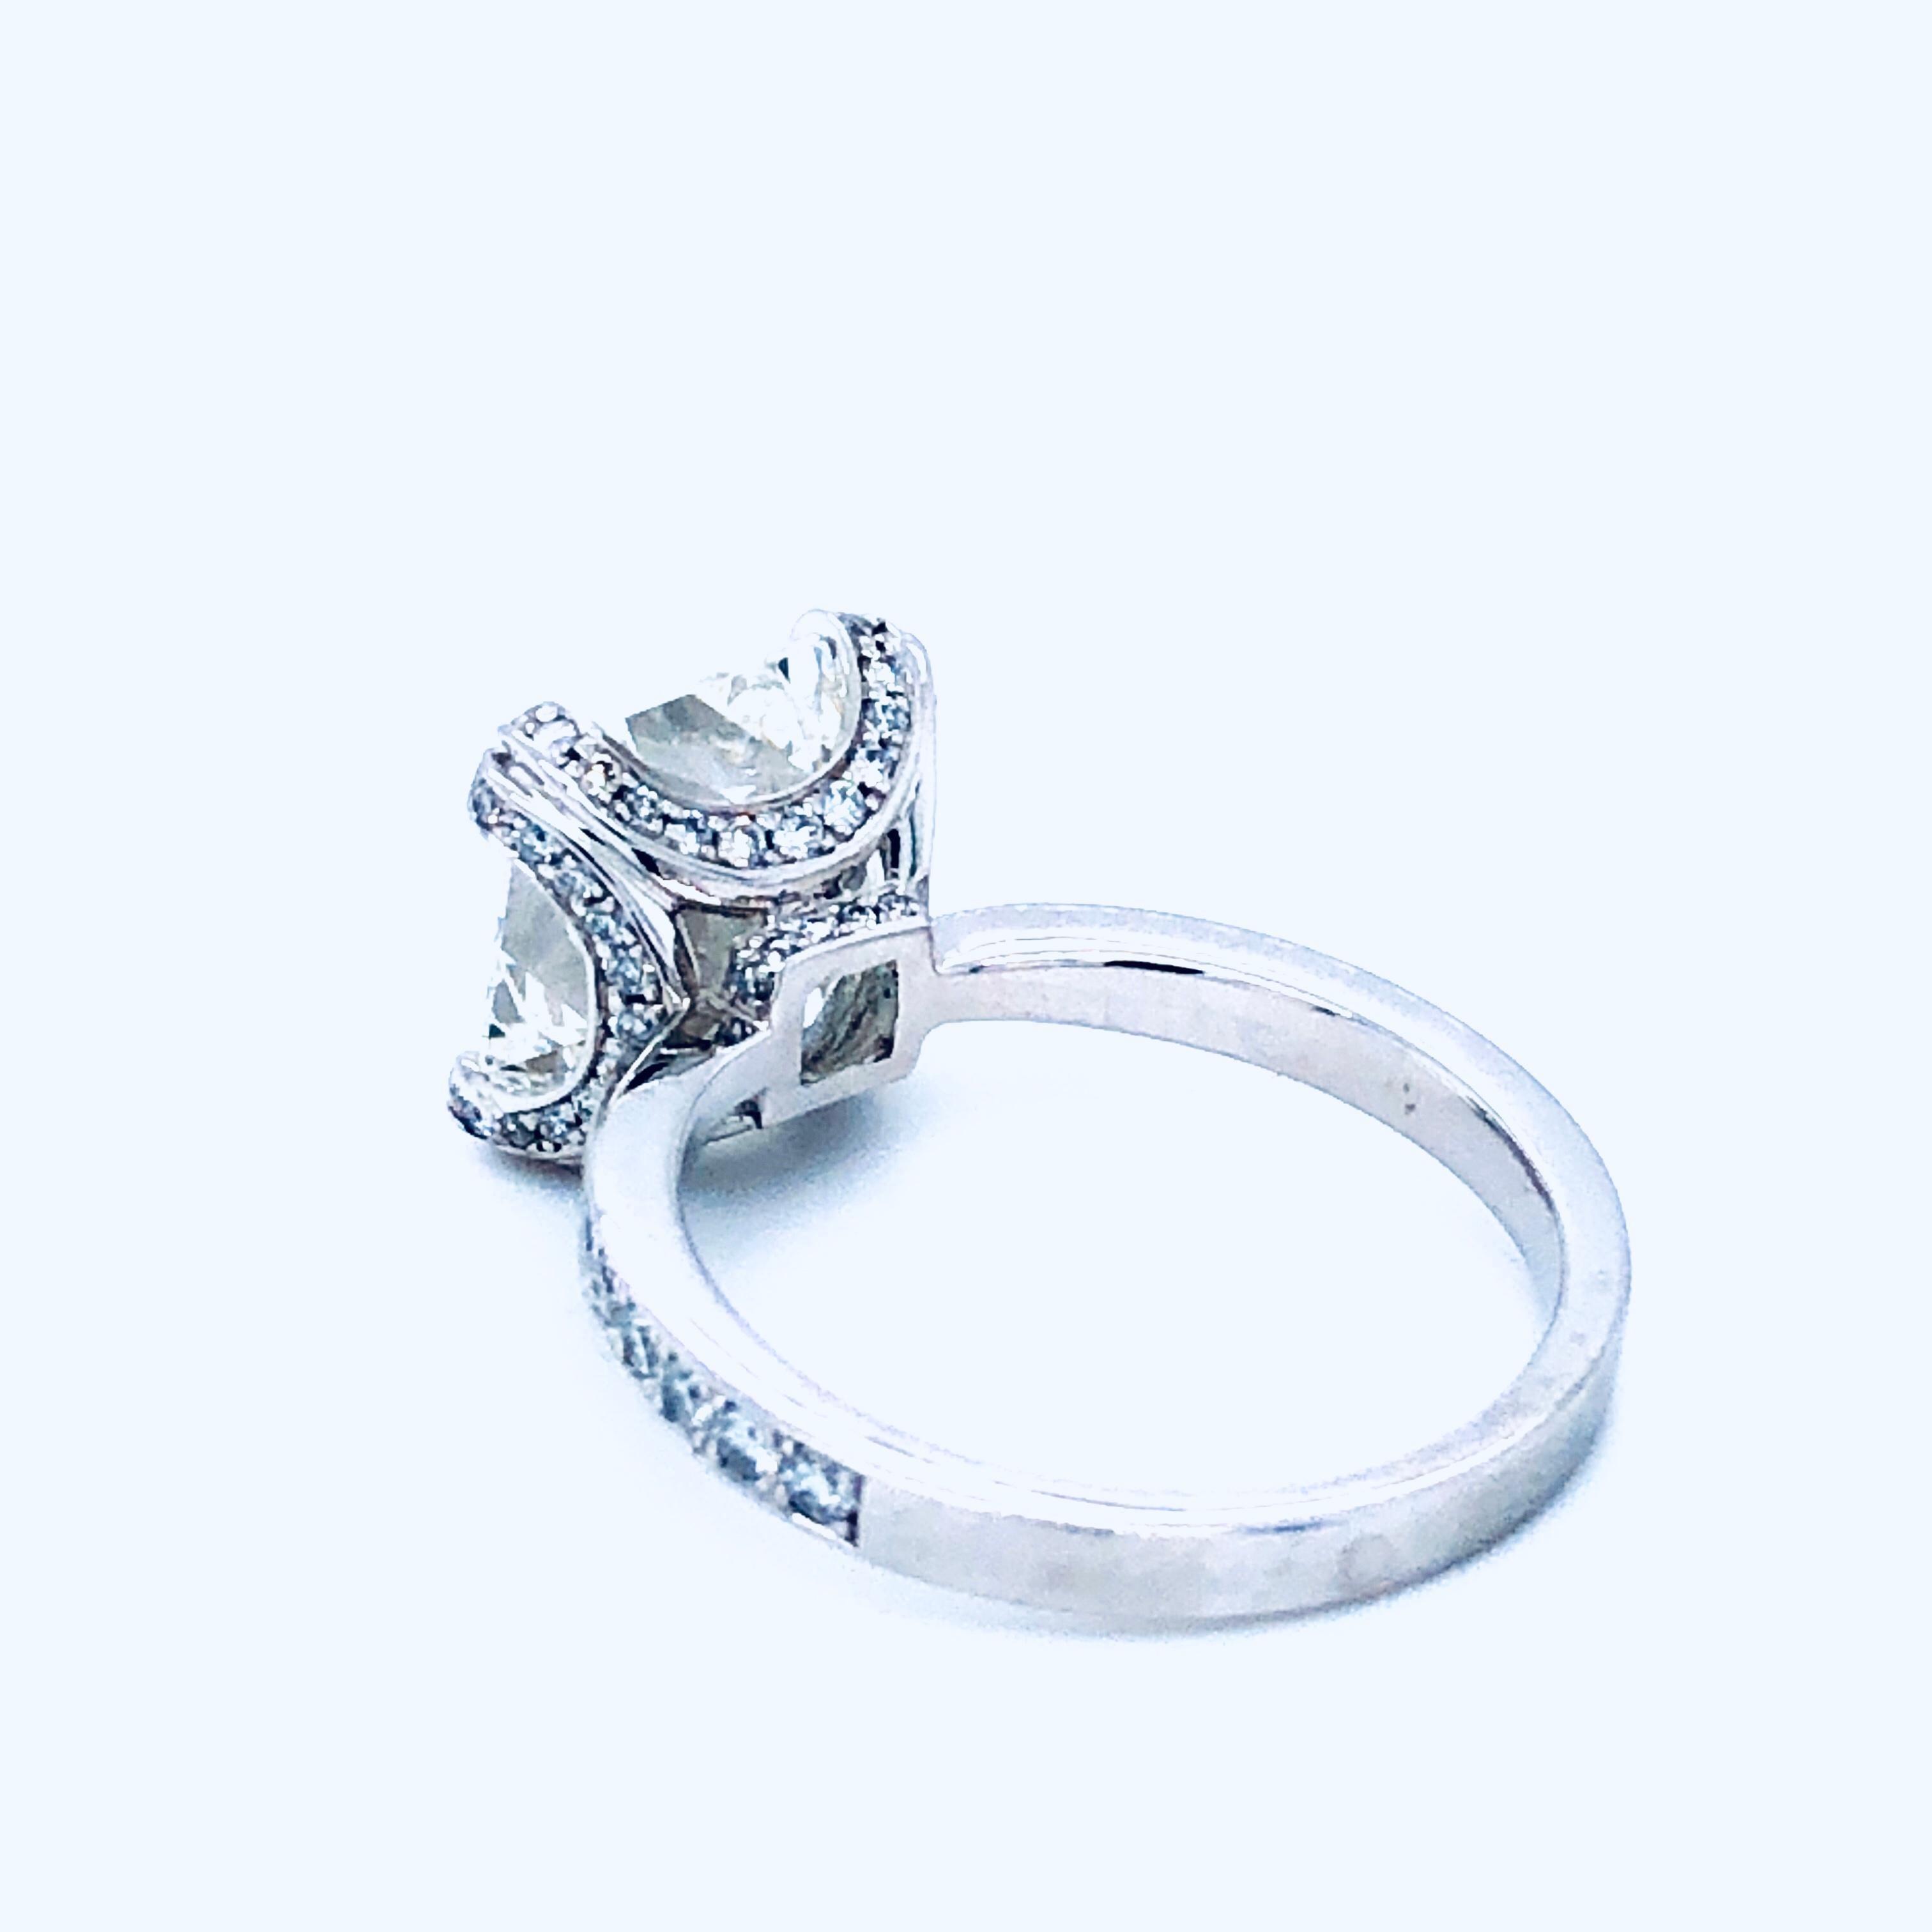 Offered here is an elegant radiant cut diamond engagement ring set in platinum.

Diamond: natural 5.11 radiant cut diamond 
Gia cert# 16226237 color:H clarity: VVs1 Measurements: 10.27 x 9.55 x 6.10 mm depth: 63.9% table: 72%
Girdle: extremely thin